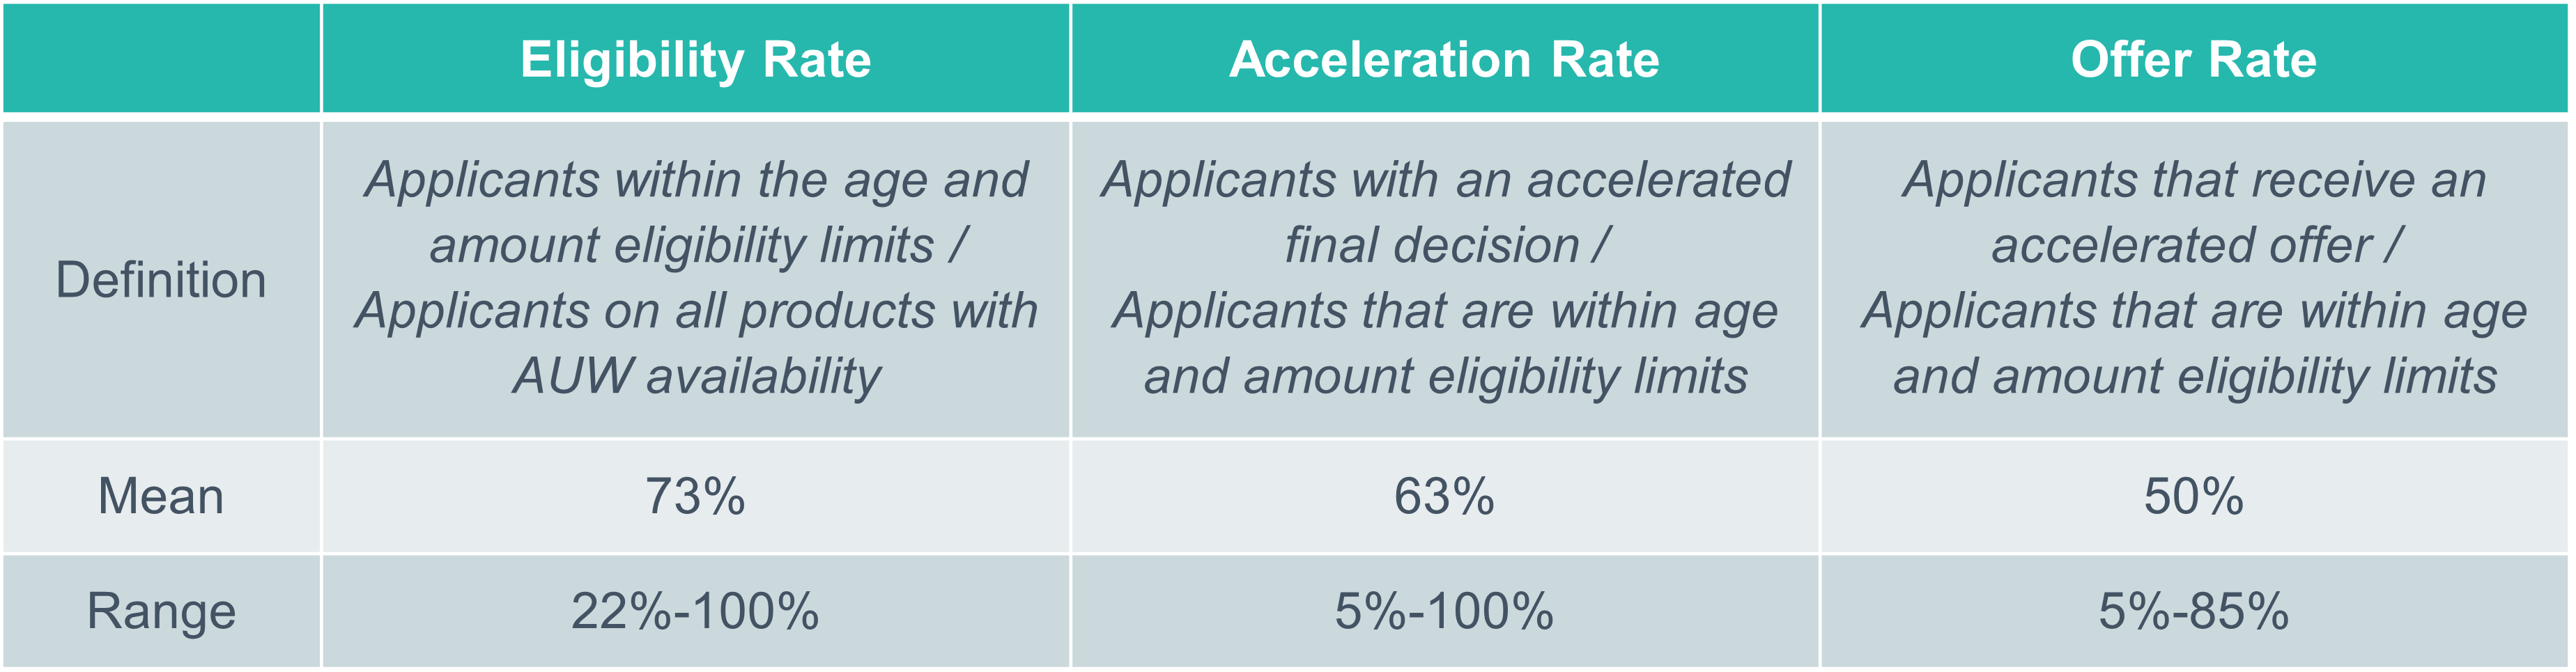 Table 1: Eligibility, Acceleration and Offer Rate